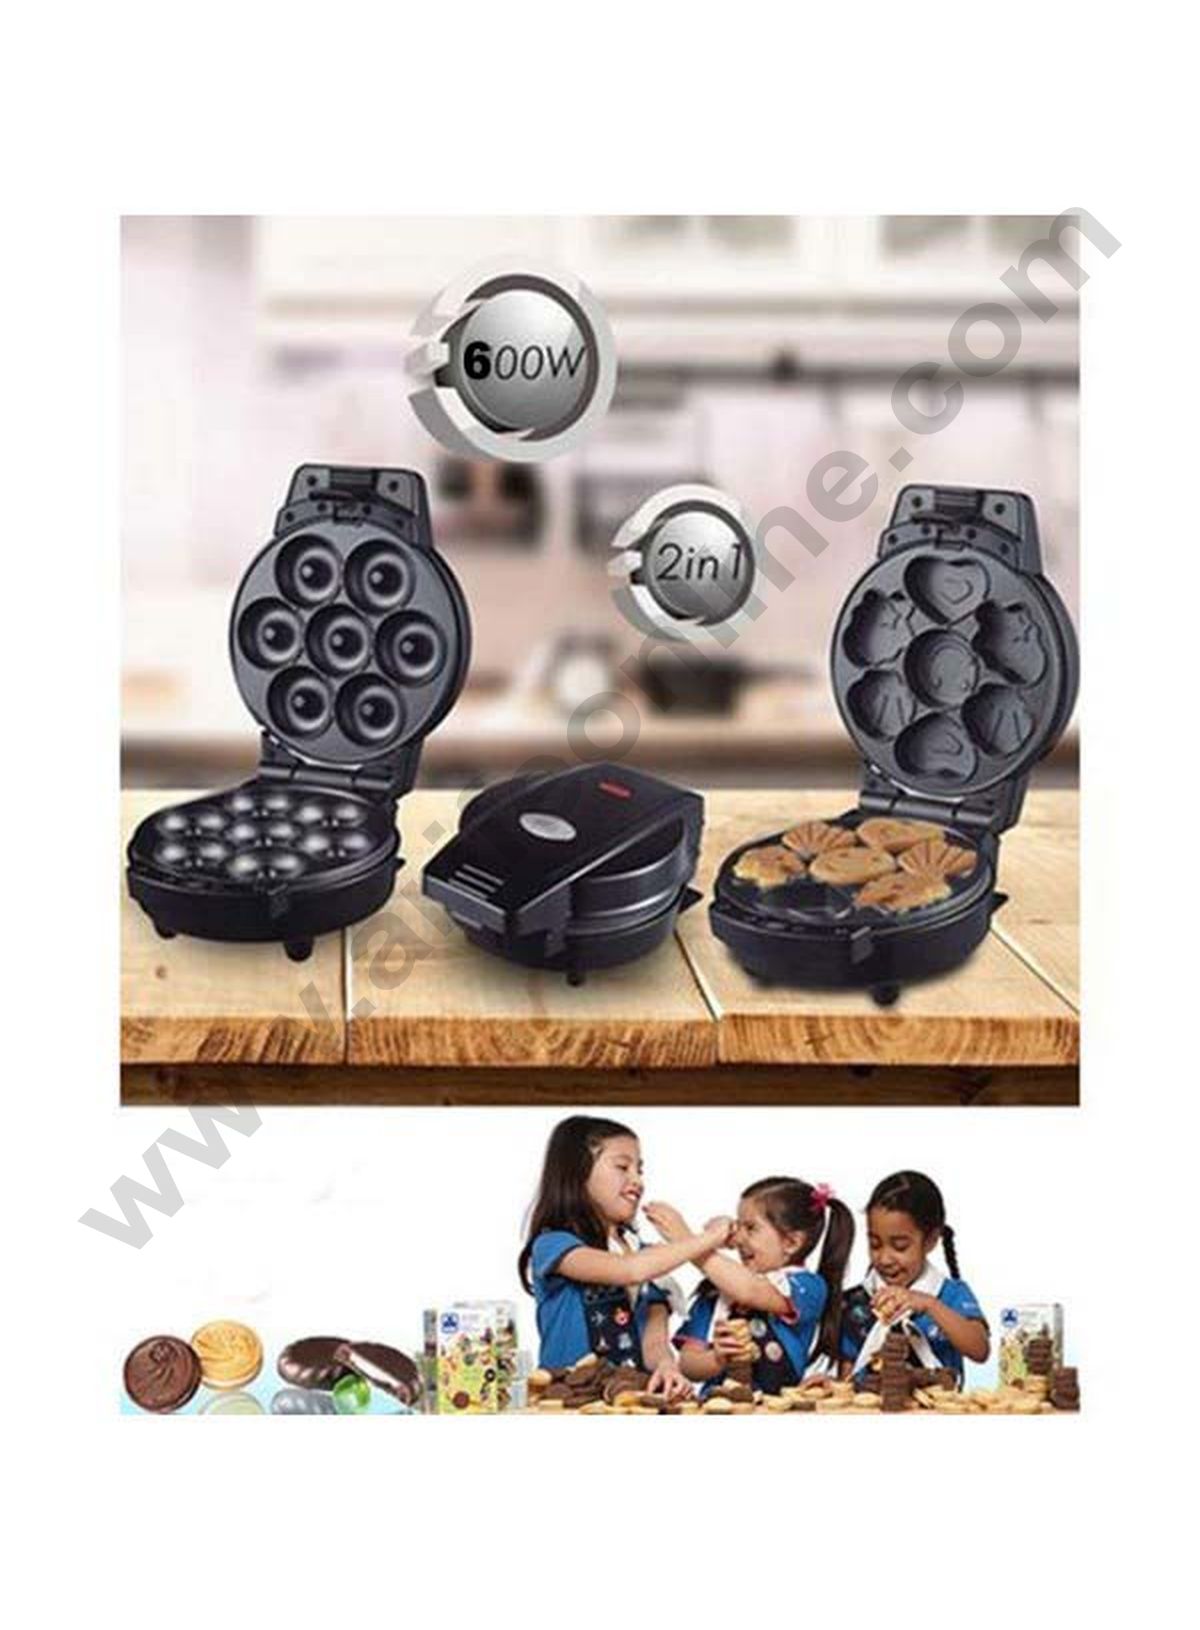 Imported Electic Mini Donut & Cookie Maker DSP KC-1103